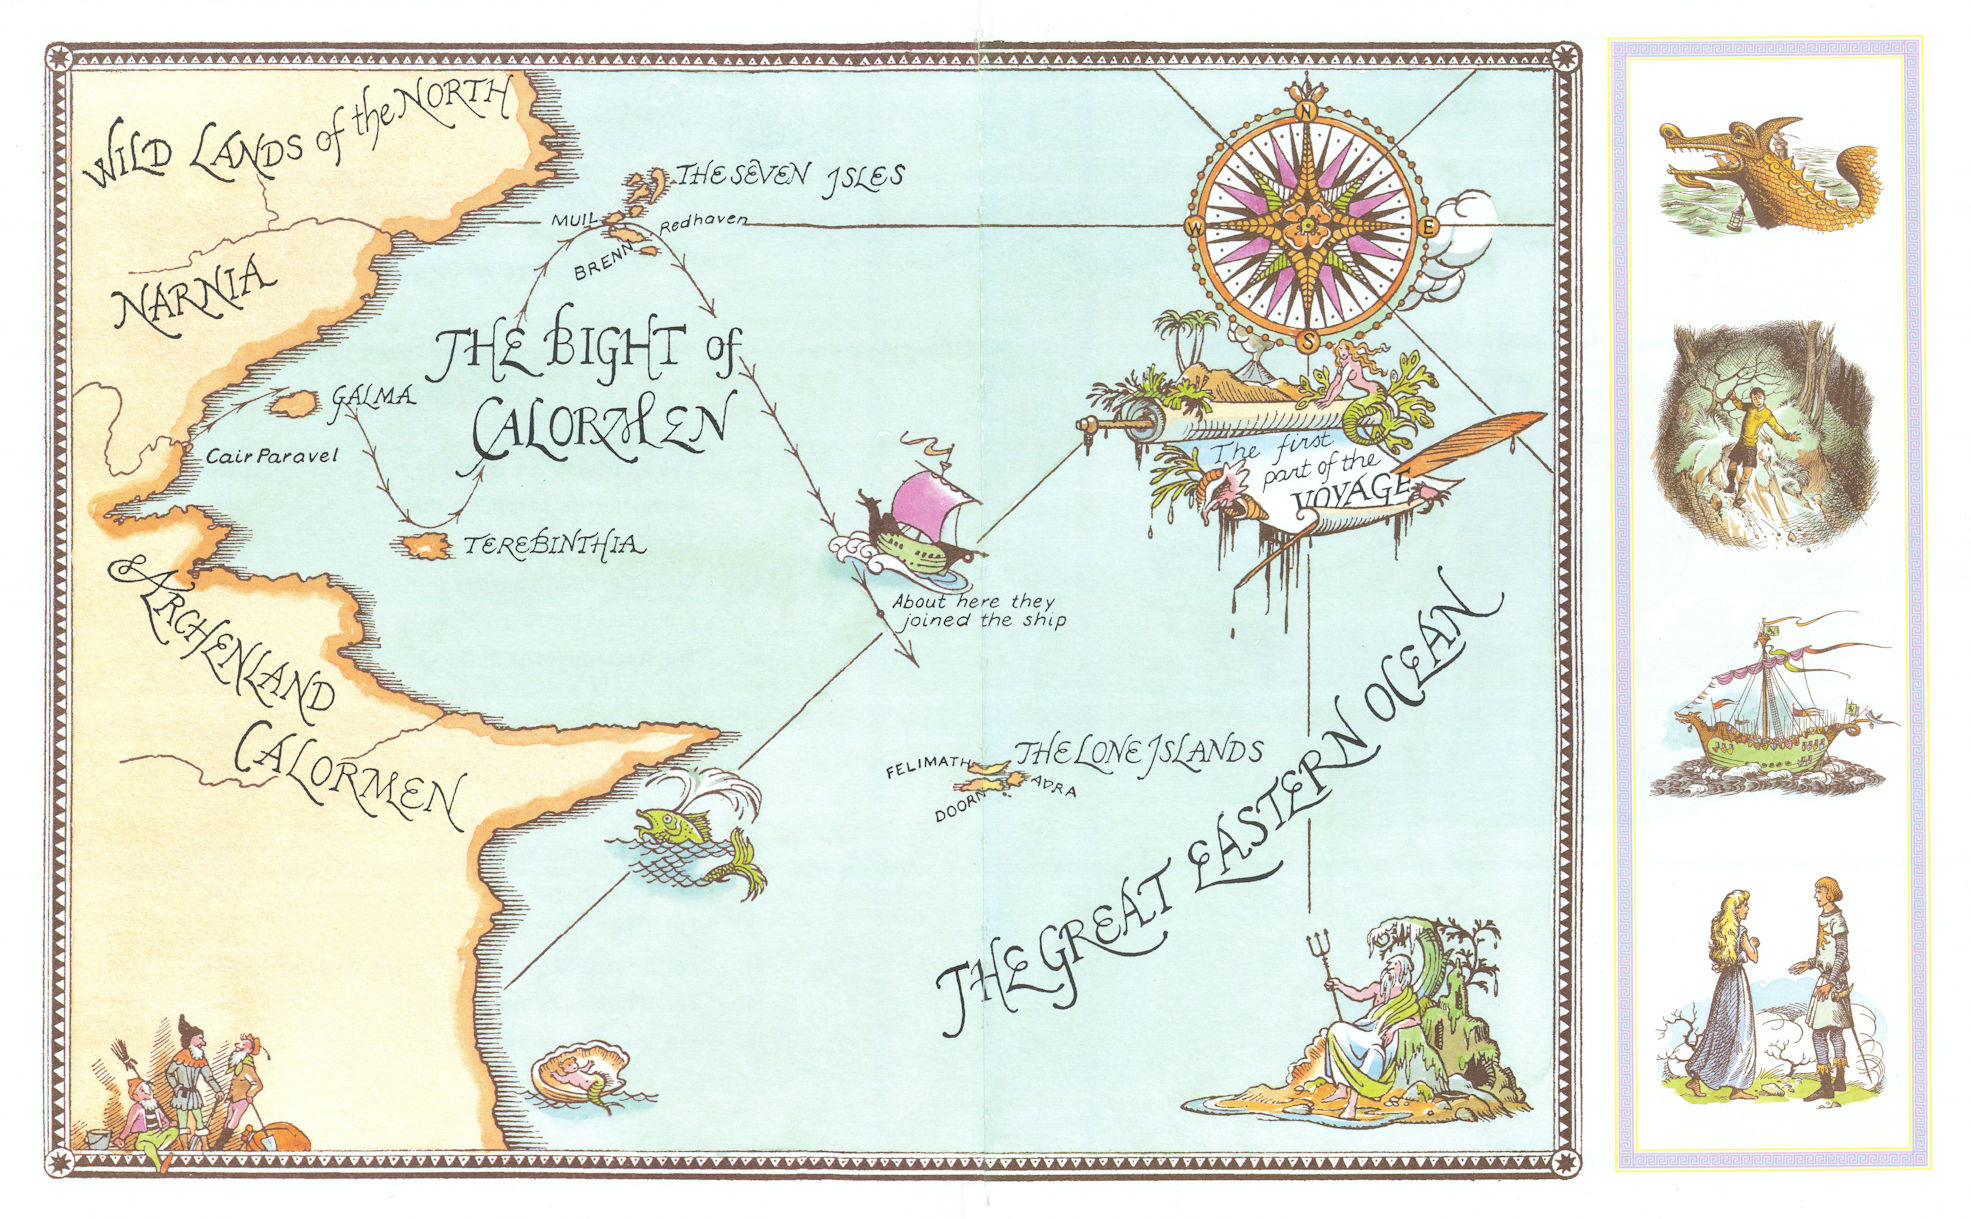 Associate Product First part of the voyage of the Dawn Treader by Pauline Baynes. Narnia 1998 map